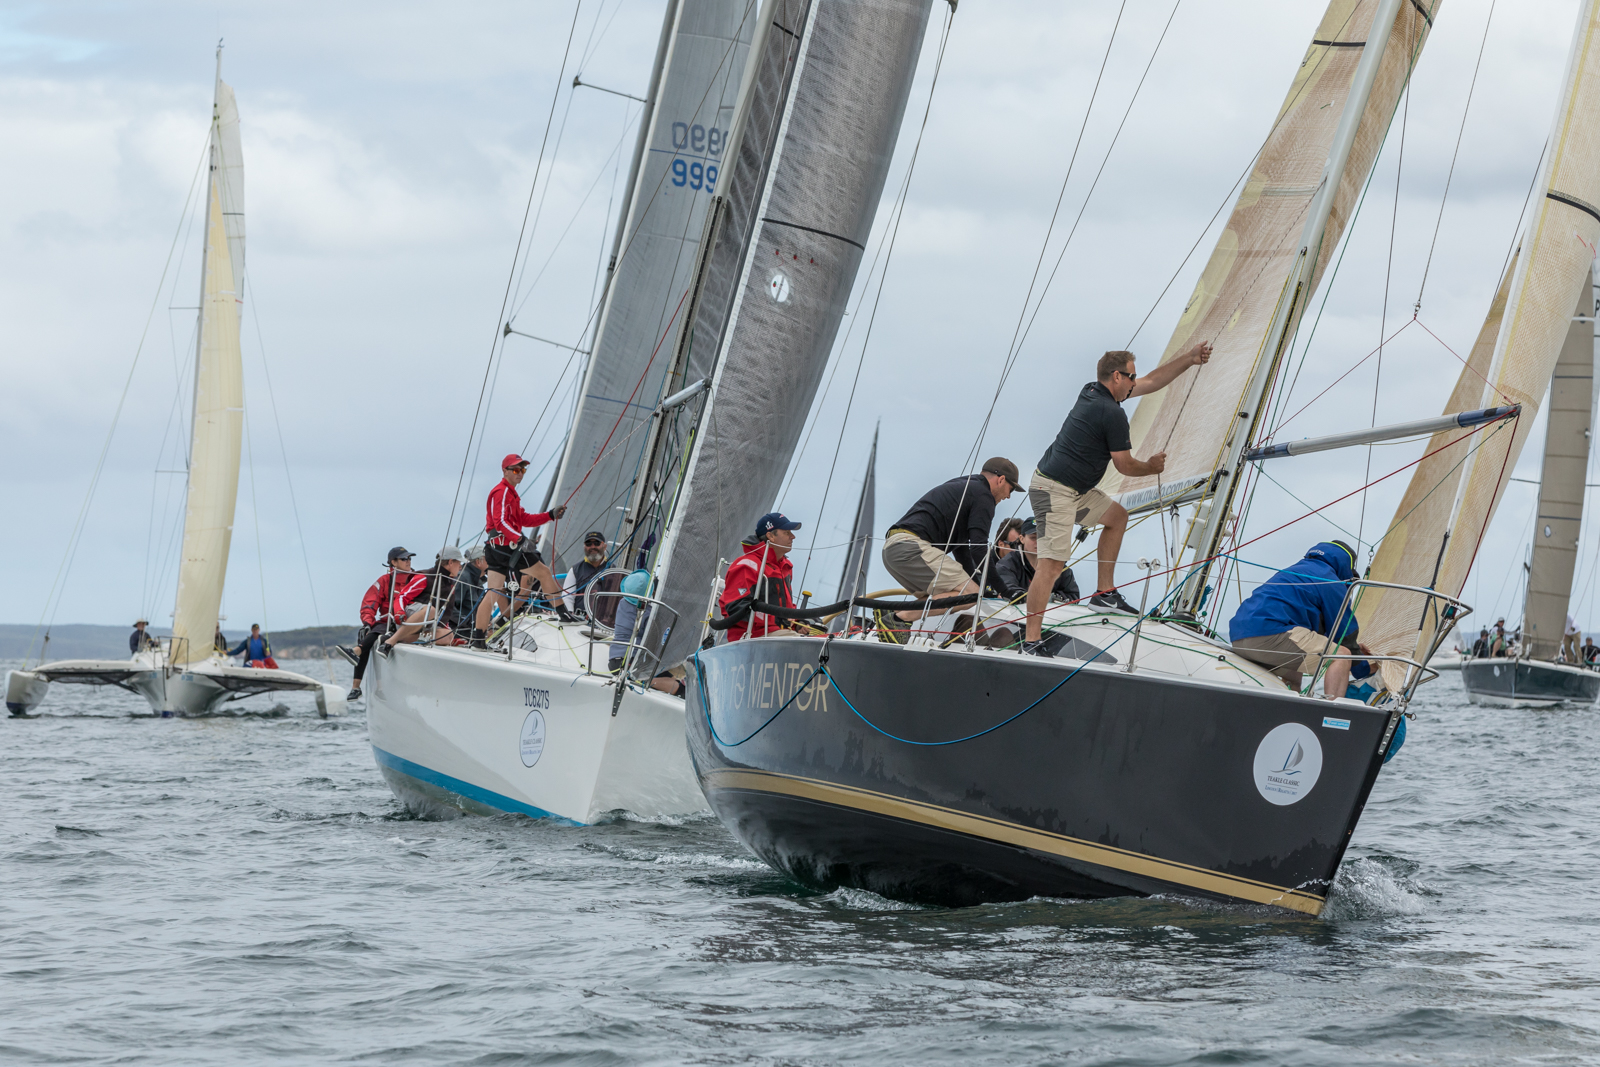 Simon Turvey steered Born to Mentor and sailed well. Photos: Take 2 Photography